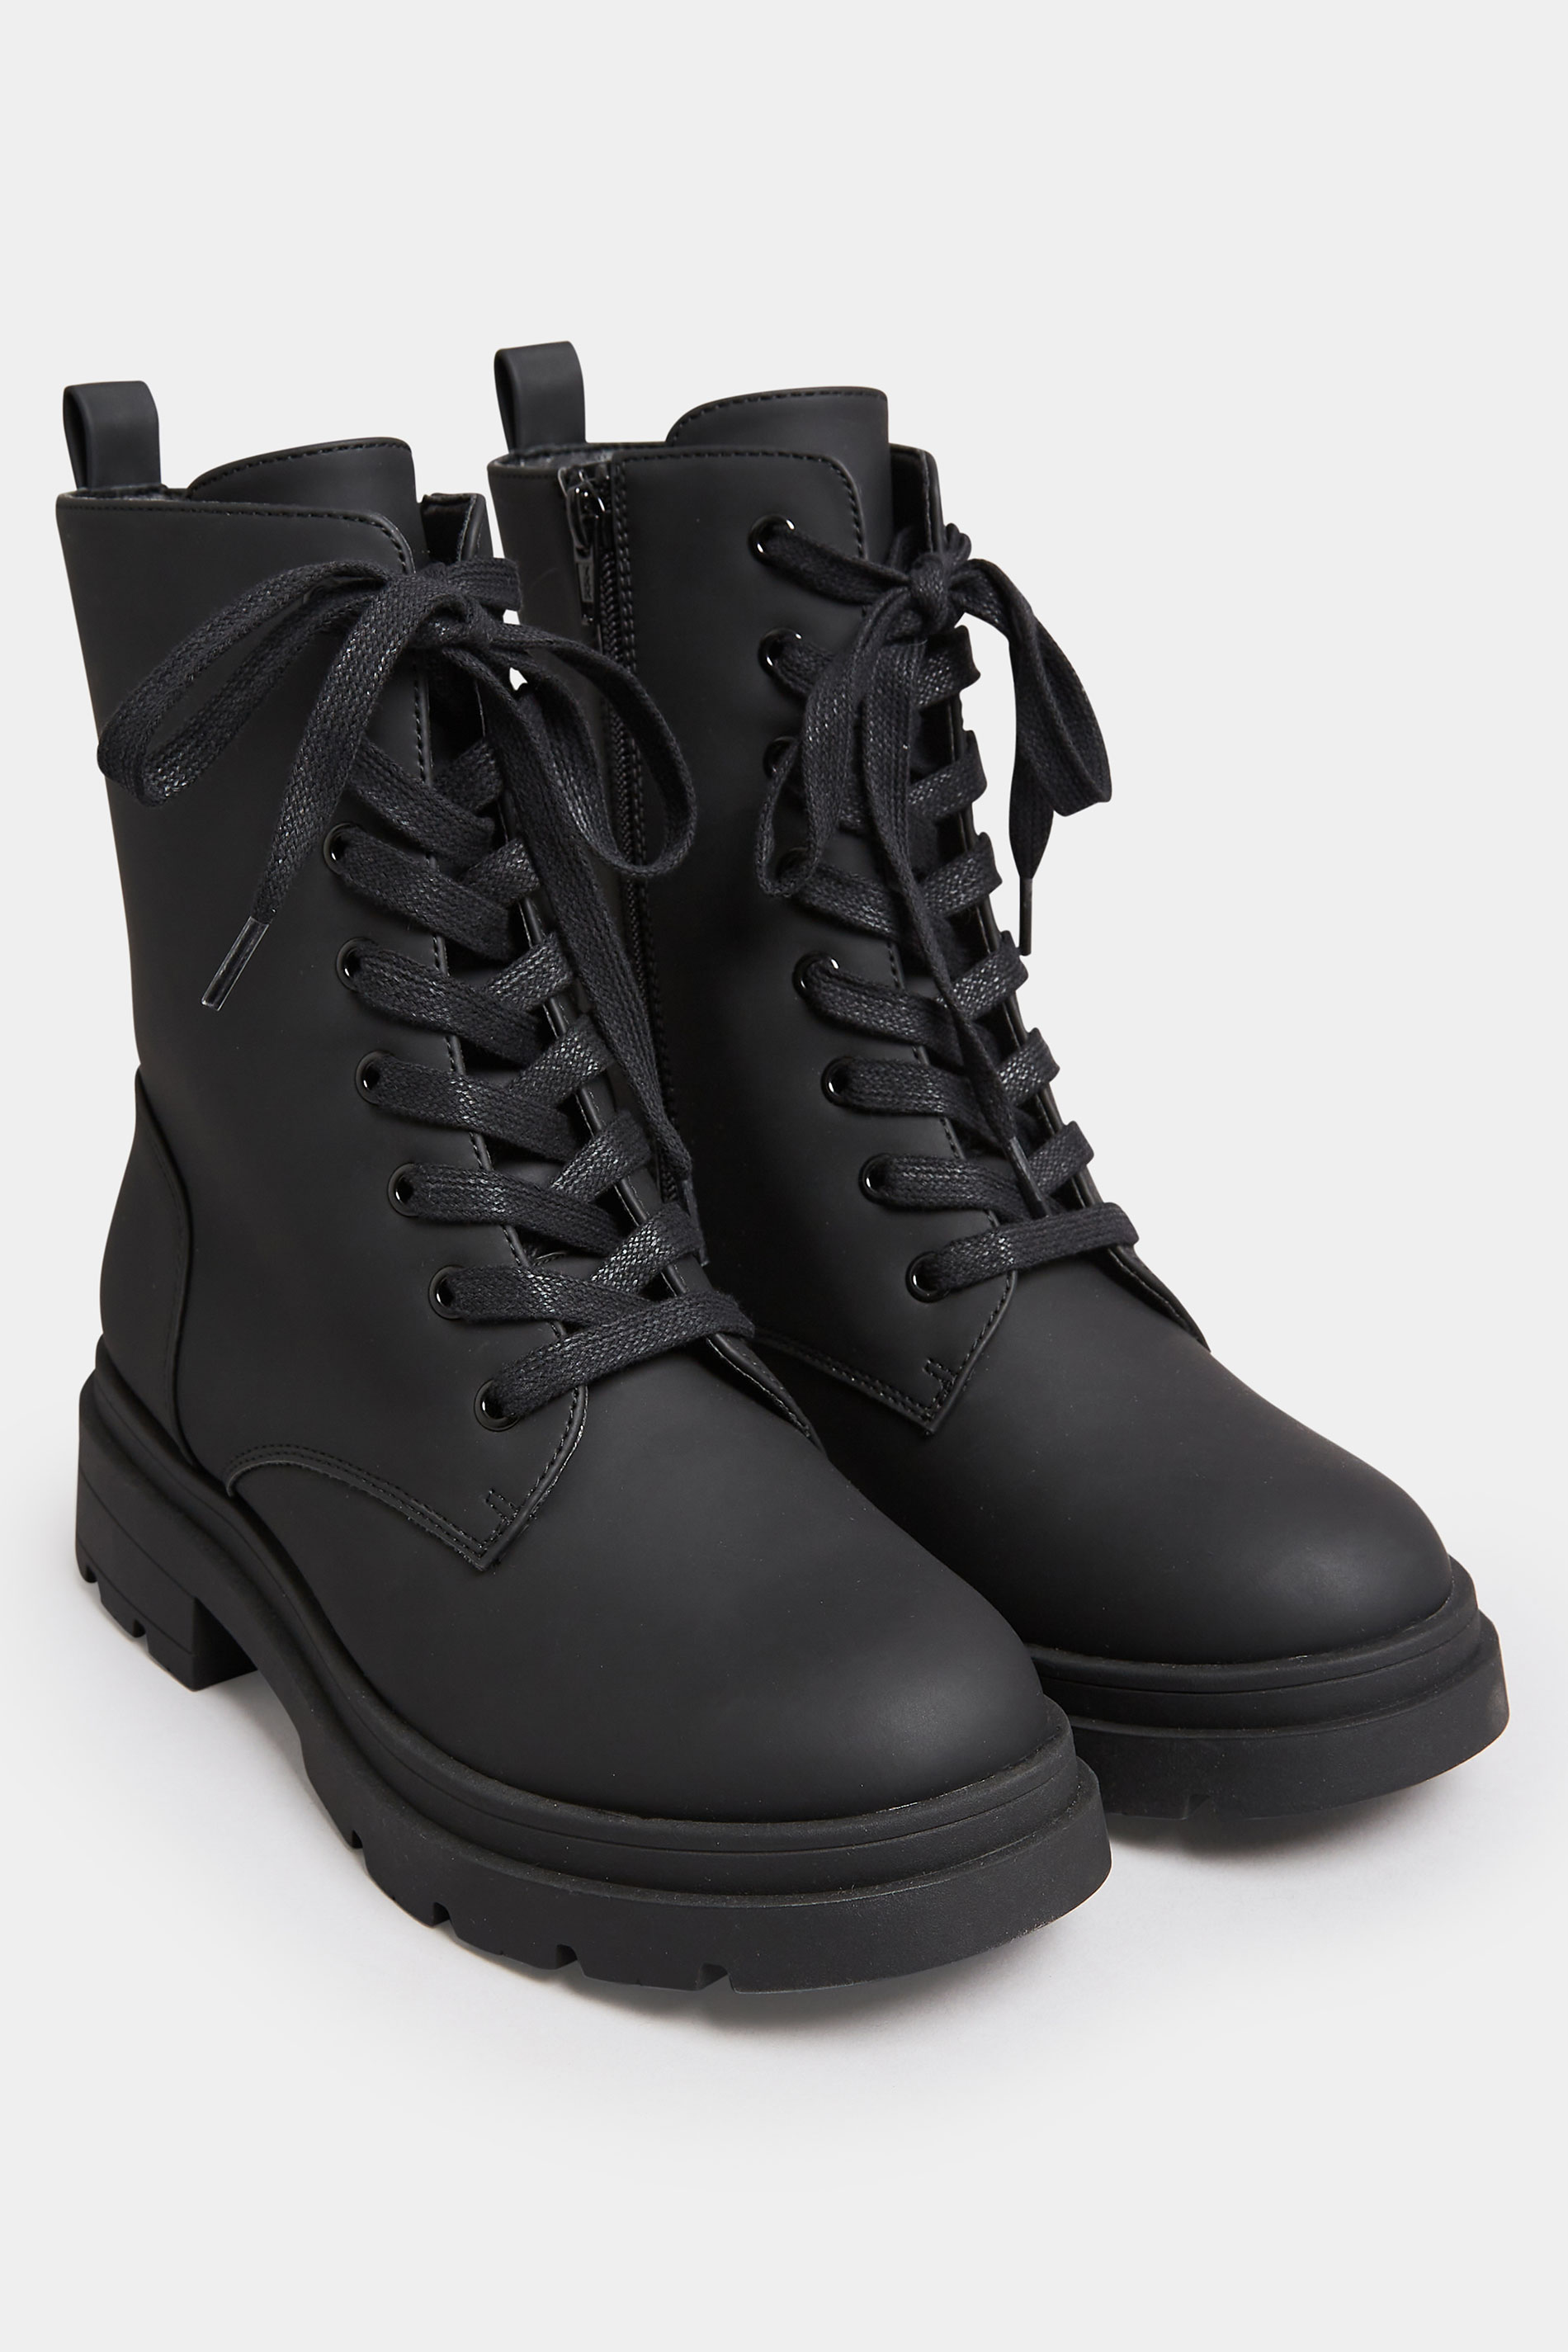 LIMITED COLLECTION Black Chunky Lace Up Boots In Wide E Fit & Extra Wide EEE Fit | Yours Clothing 2